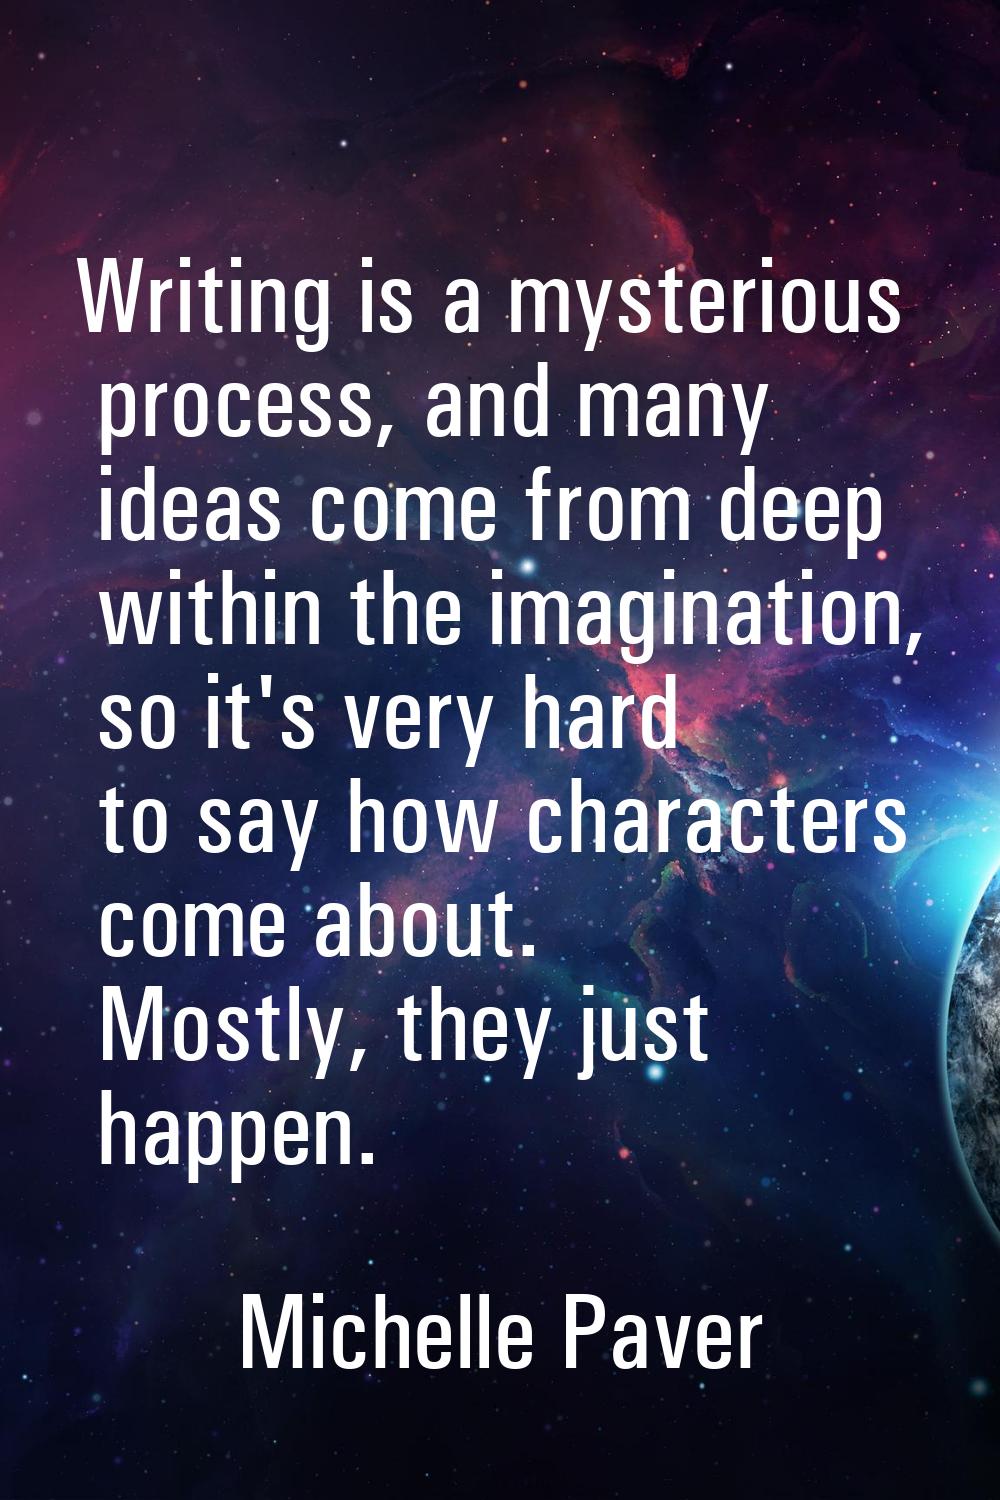 Writing is a mysterious process, and many ideas come from deep within the imagination, so it's very